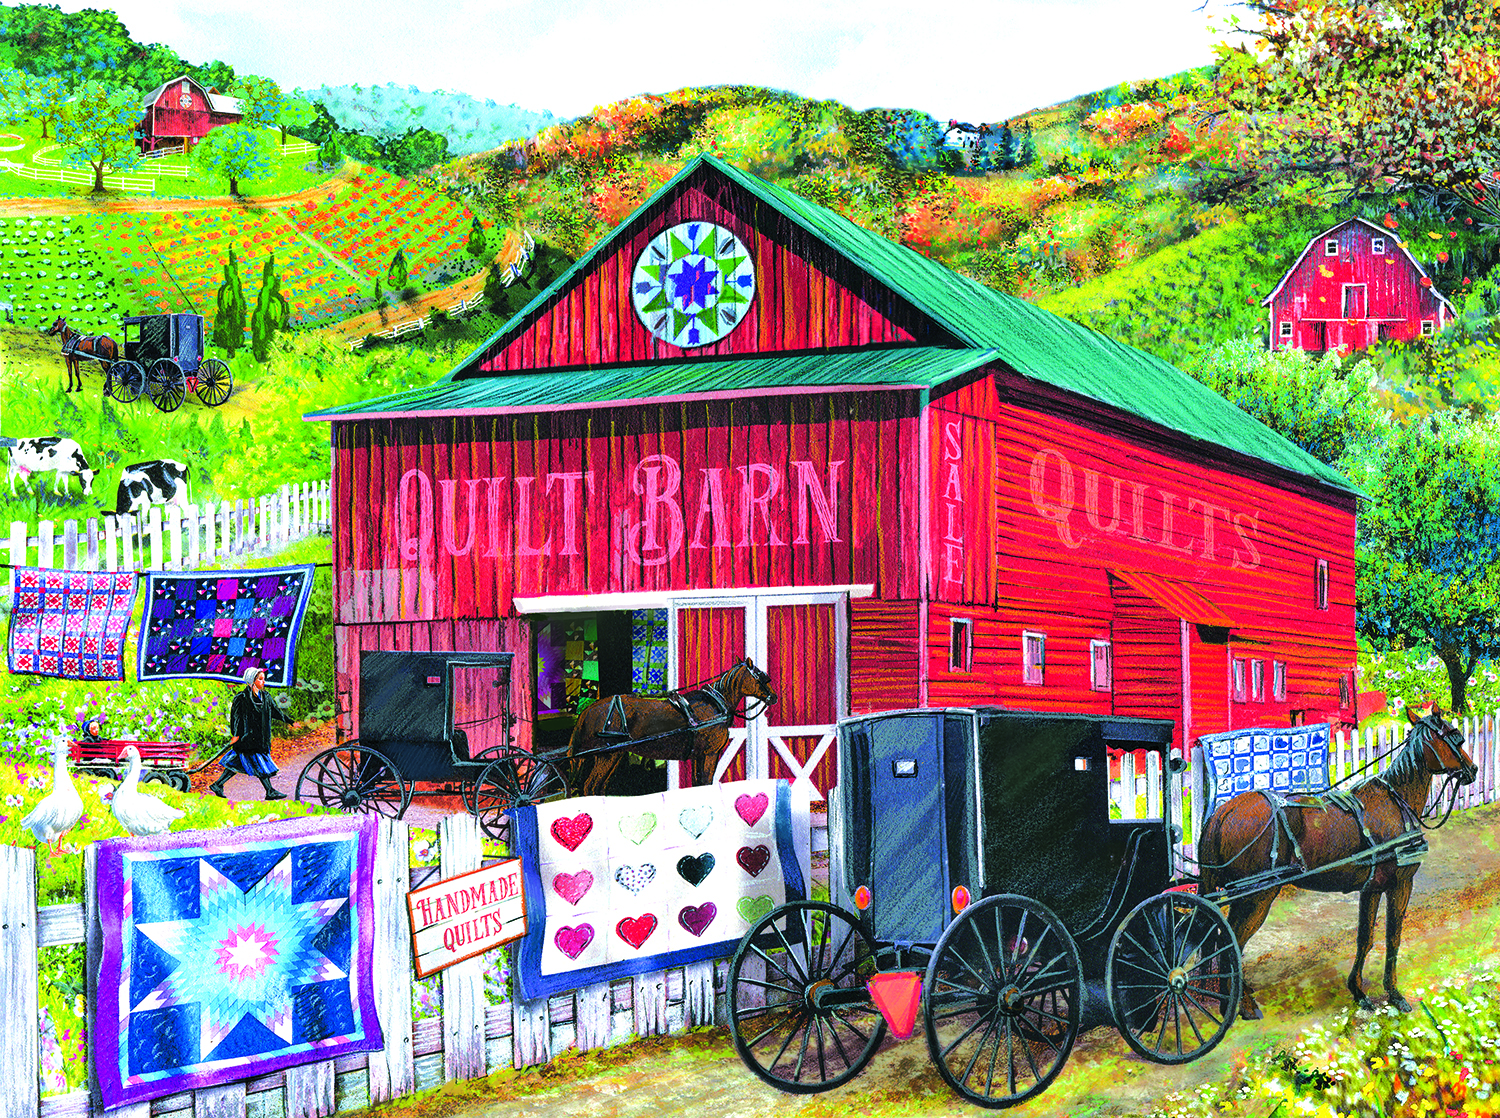 Stopping at the Quilt Barn